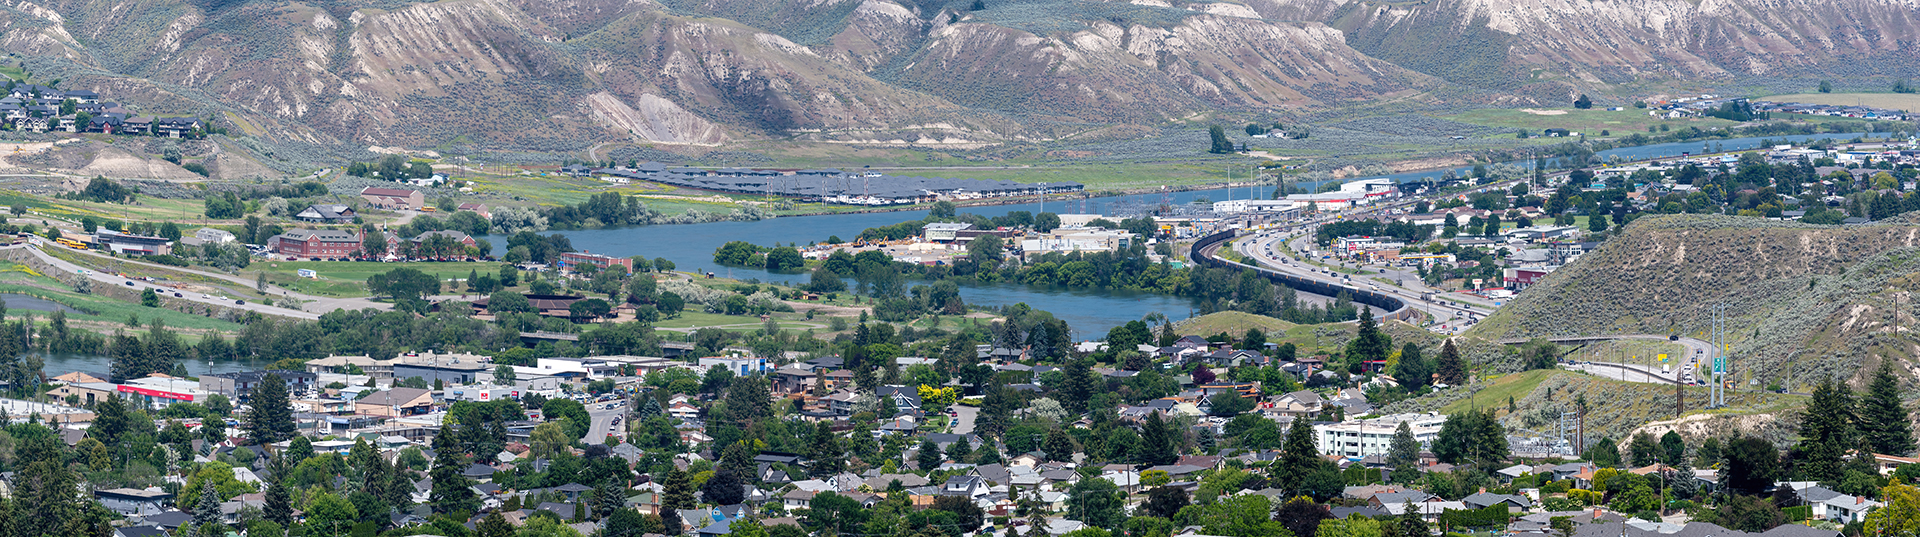 panoramic view of lakes mountains and trees across a city